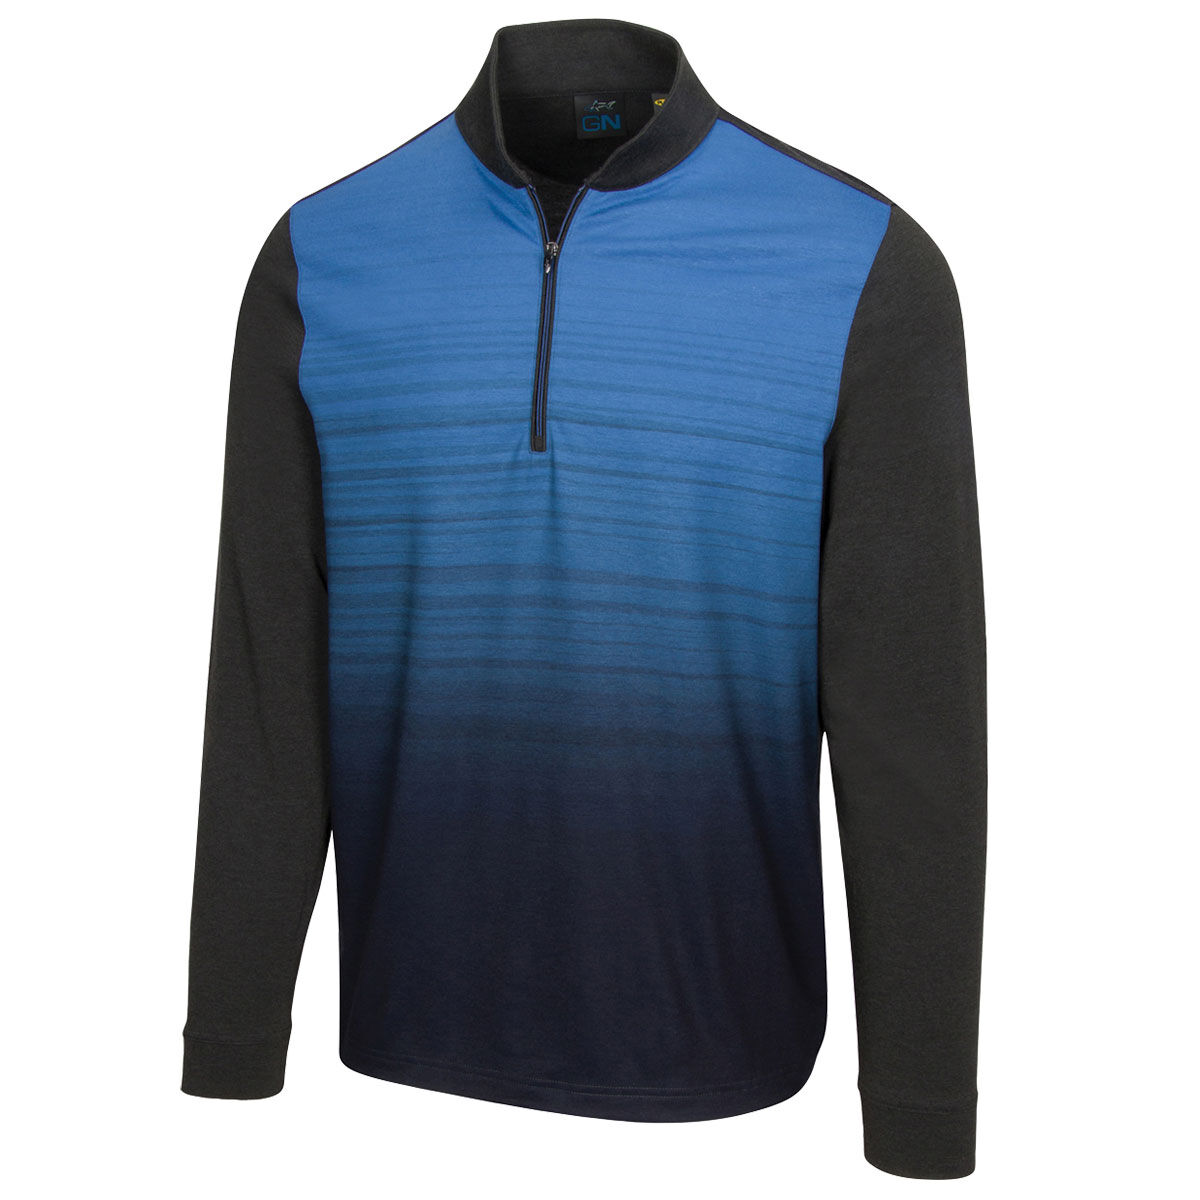 Greg Norman Black and Blue Colour Block Nightsky 1/4 Zip Midlayer, Mens | American Golf, Size: Small